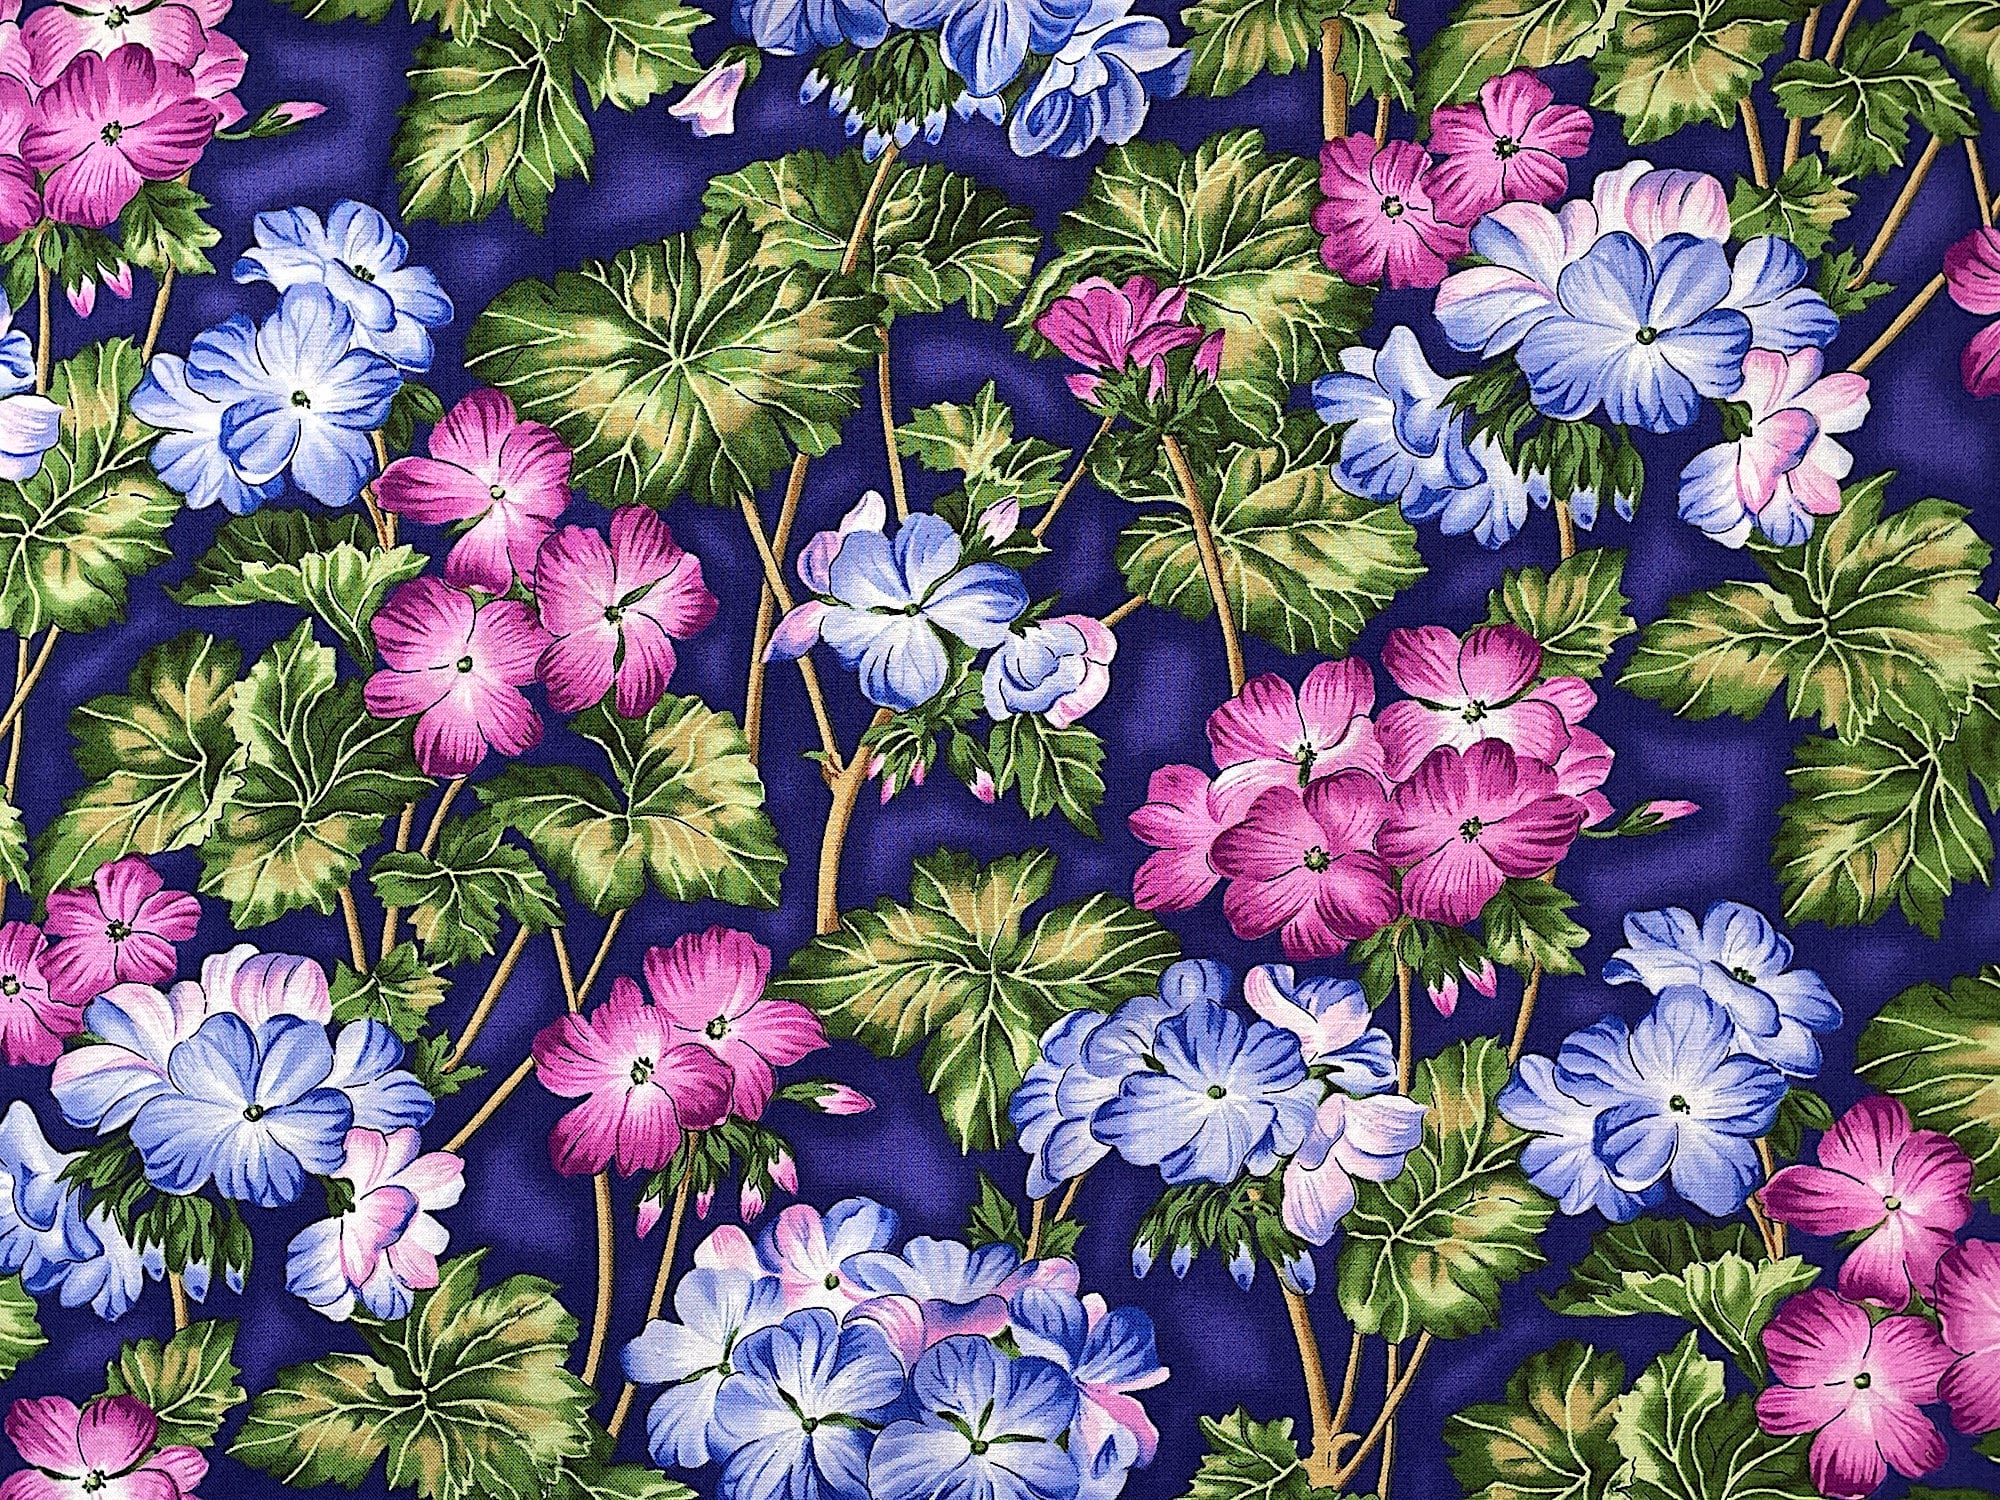 This cotton fabric is called Geraniums Fuchsia Cobalt and is covered with lavender and blue geraniums and green leaves. This fabric is part of the Flower Festival 2 collection by Benartex.